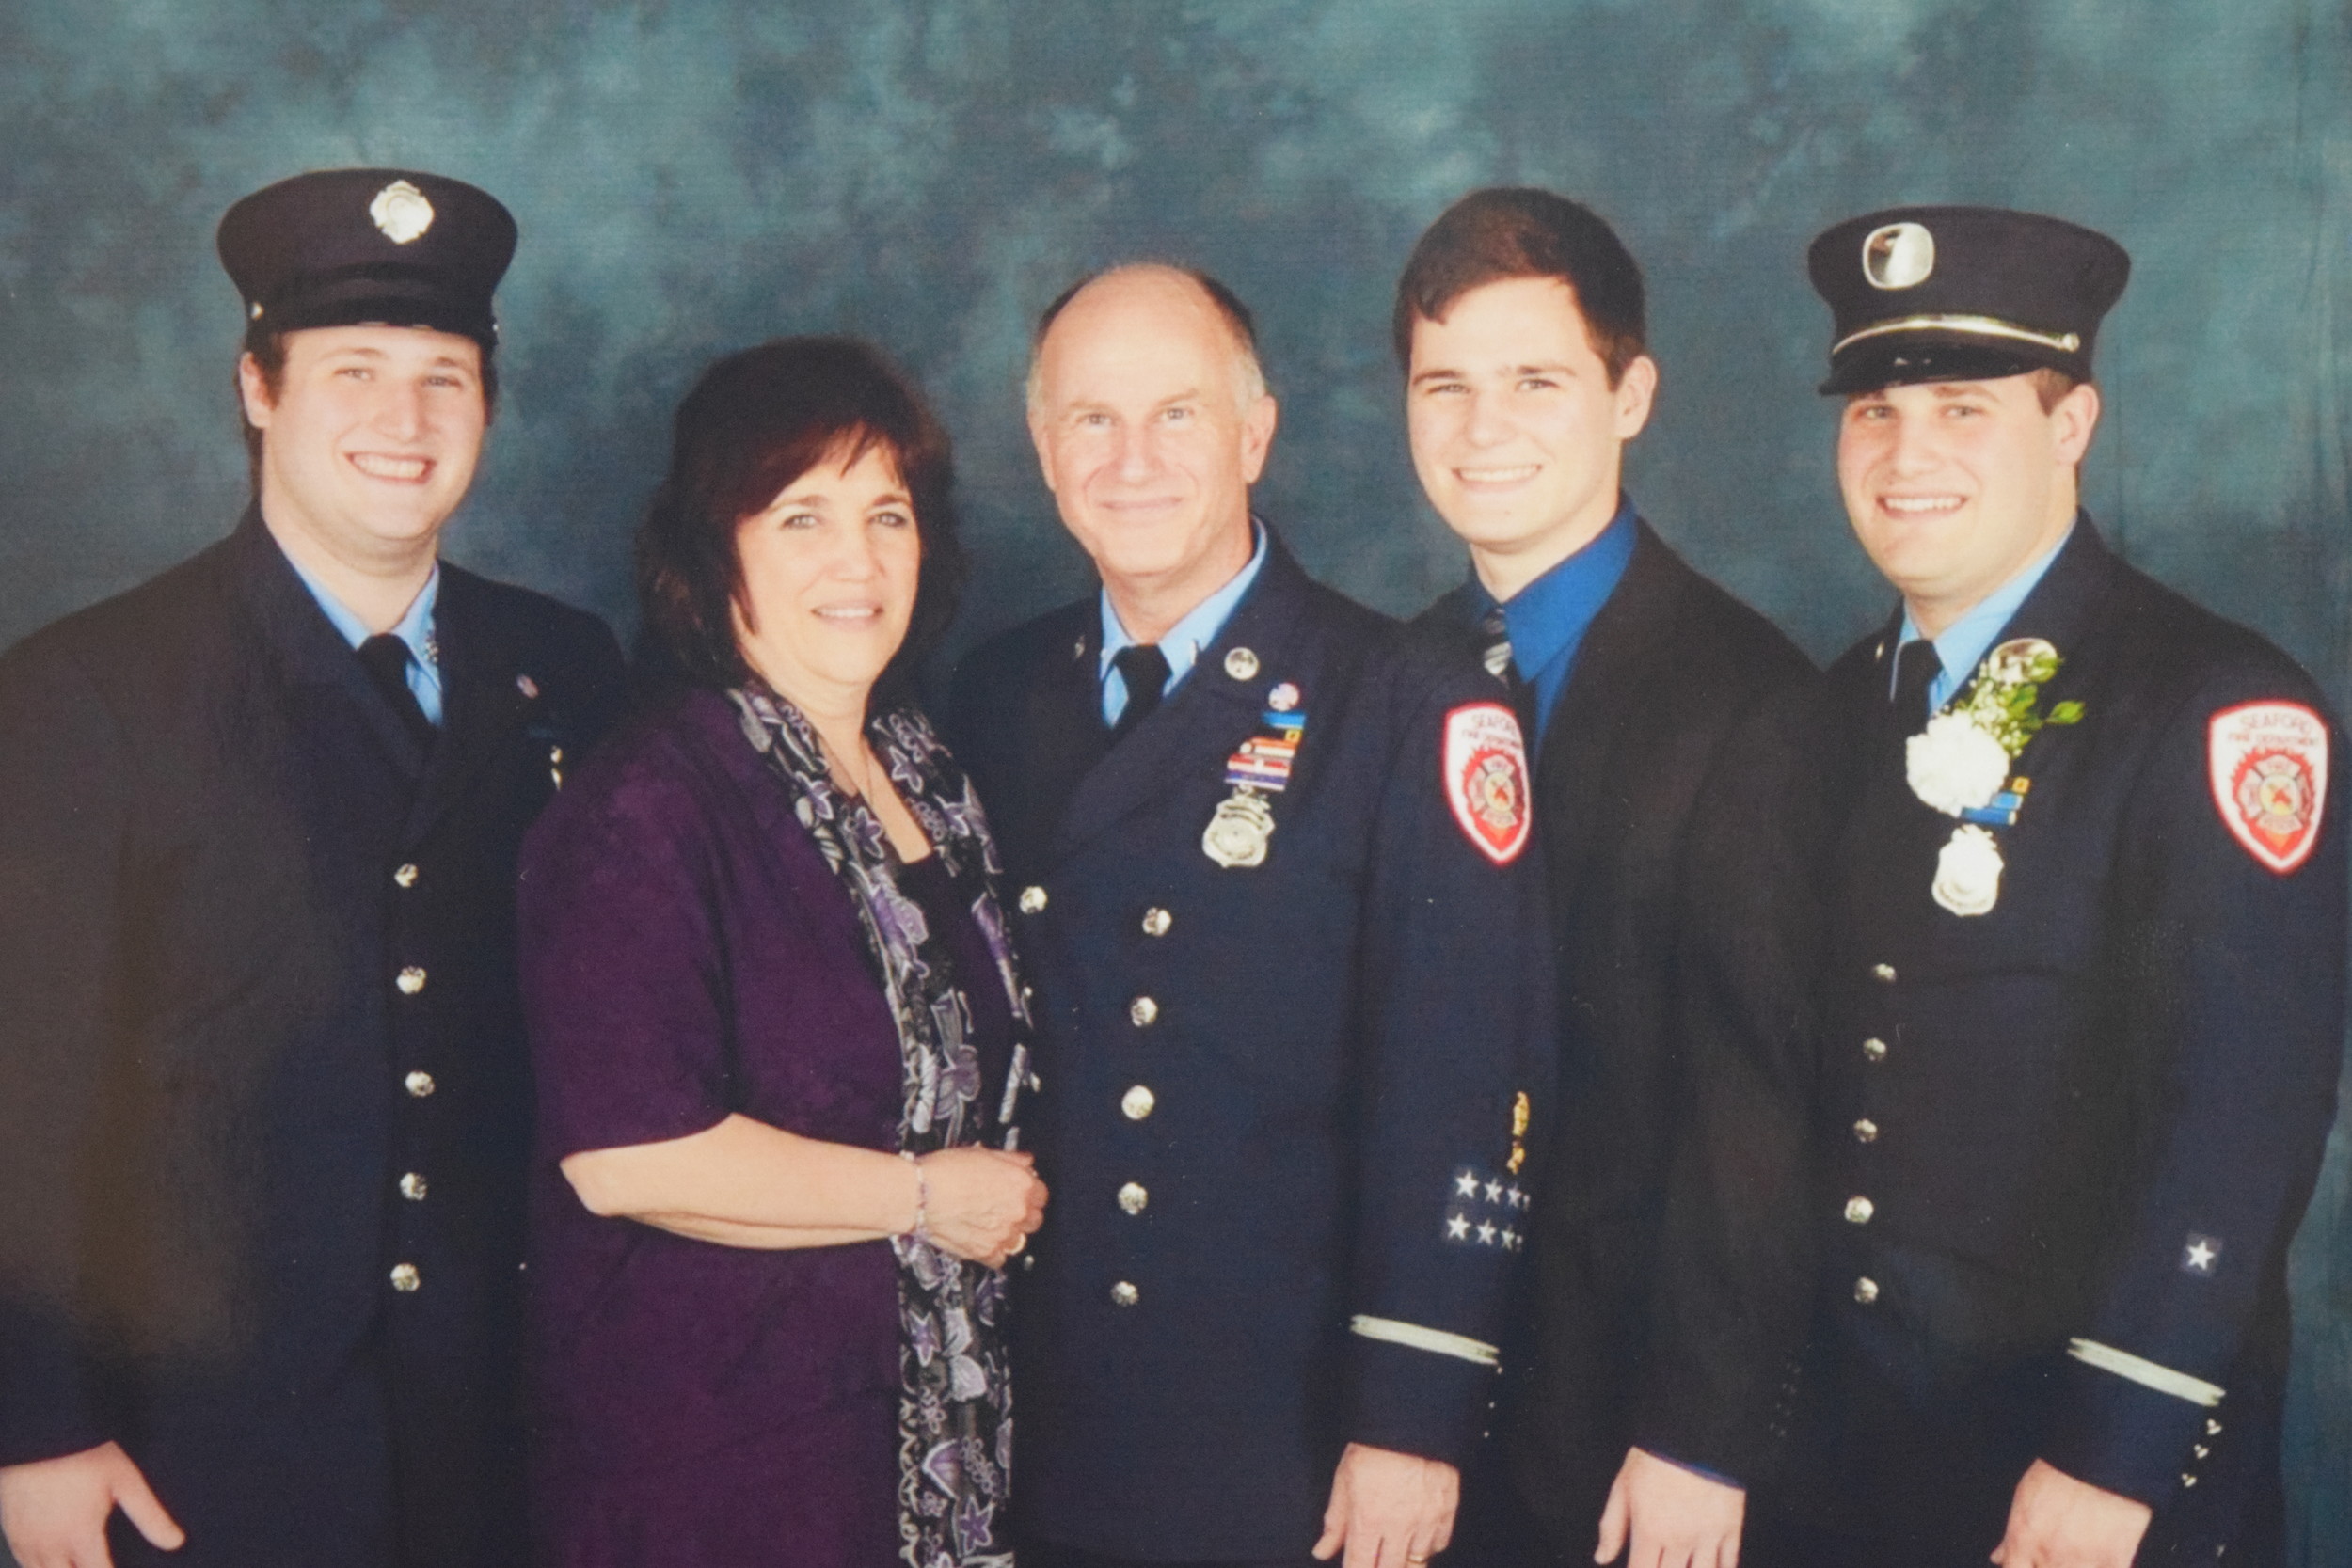 The Nicolas — from left, John, Susan, Phil, Michael and Steven — contribute to their hometown of Seaford through membership in the Fire Department.